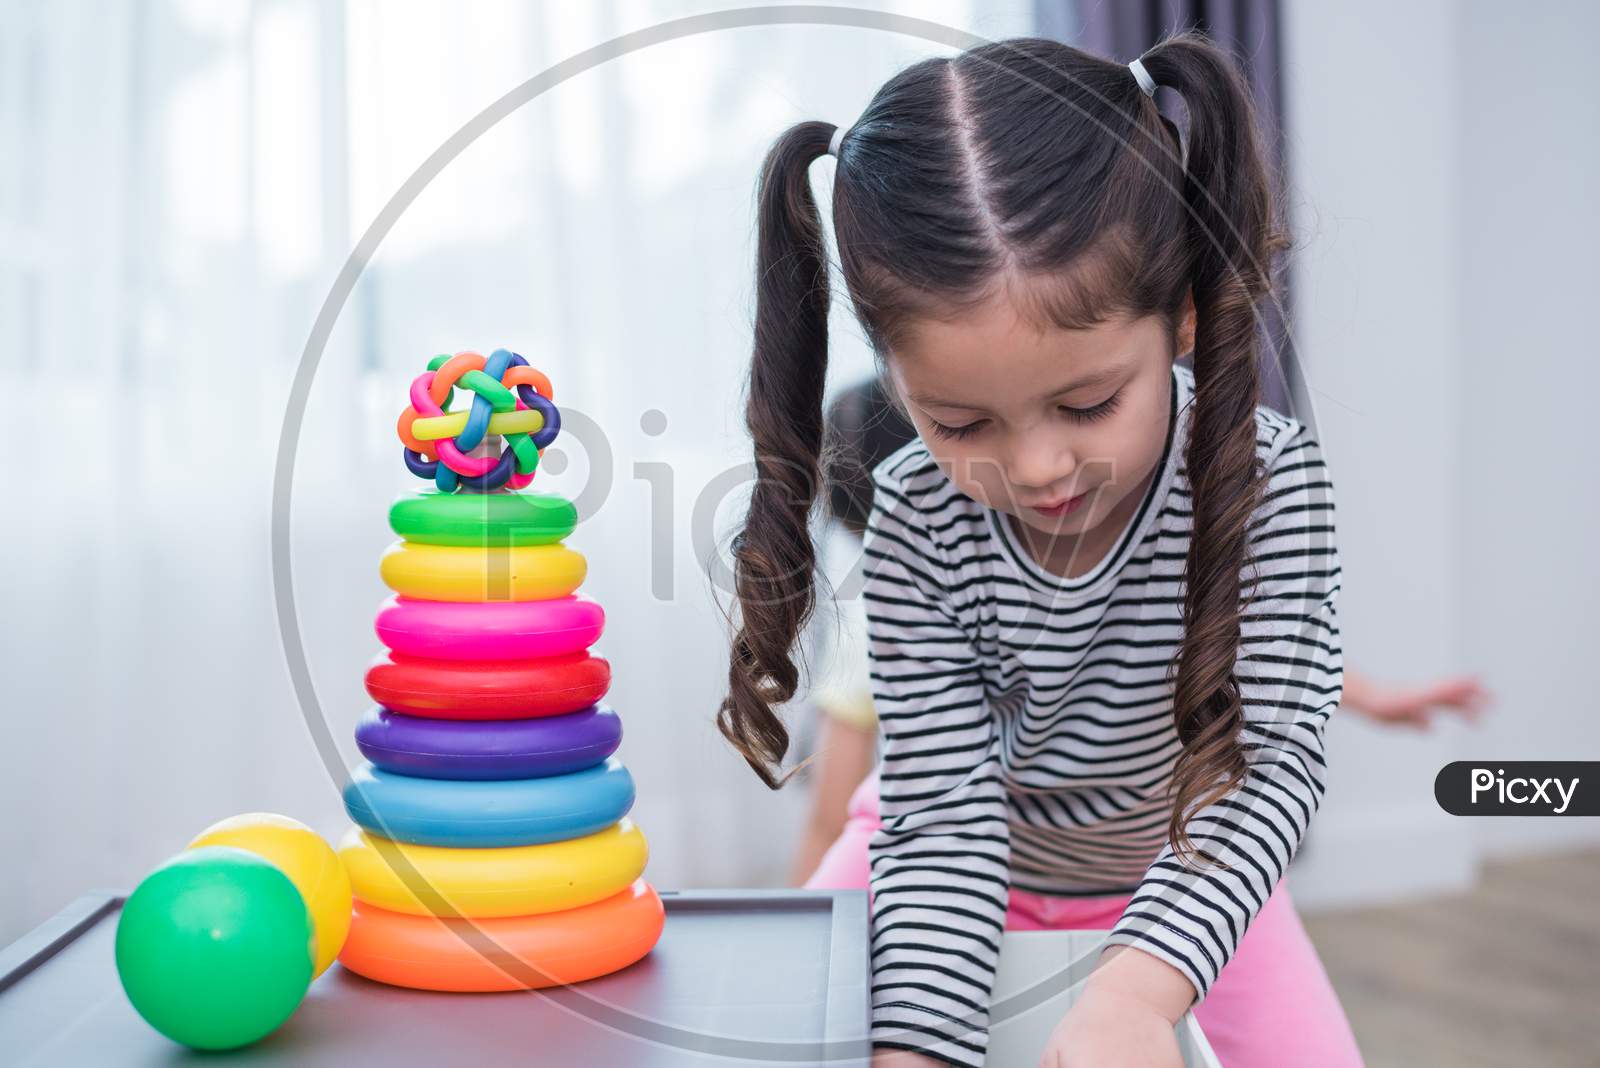 Little Girls Playing Small Toy Hoops In Home. Education And Happiness Lifestyle Concept. Funny Learning And Children Development Theme. Smile Faces